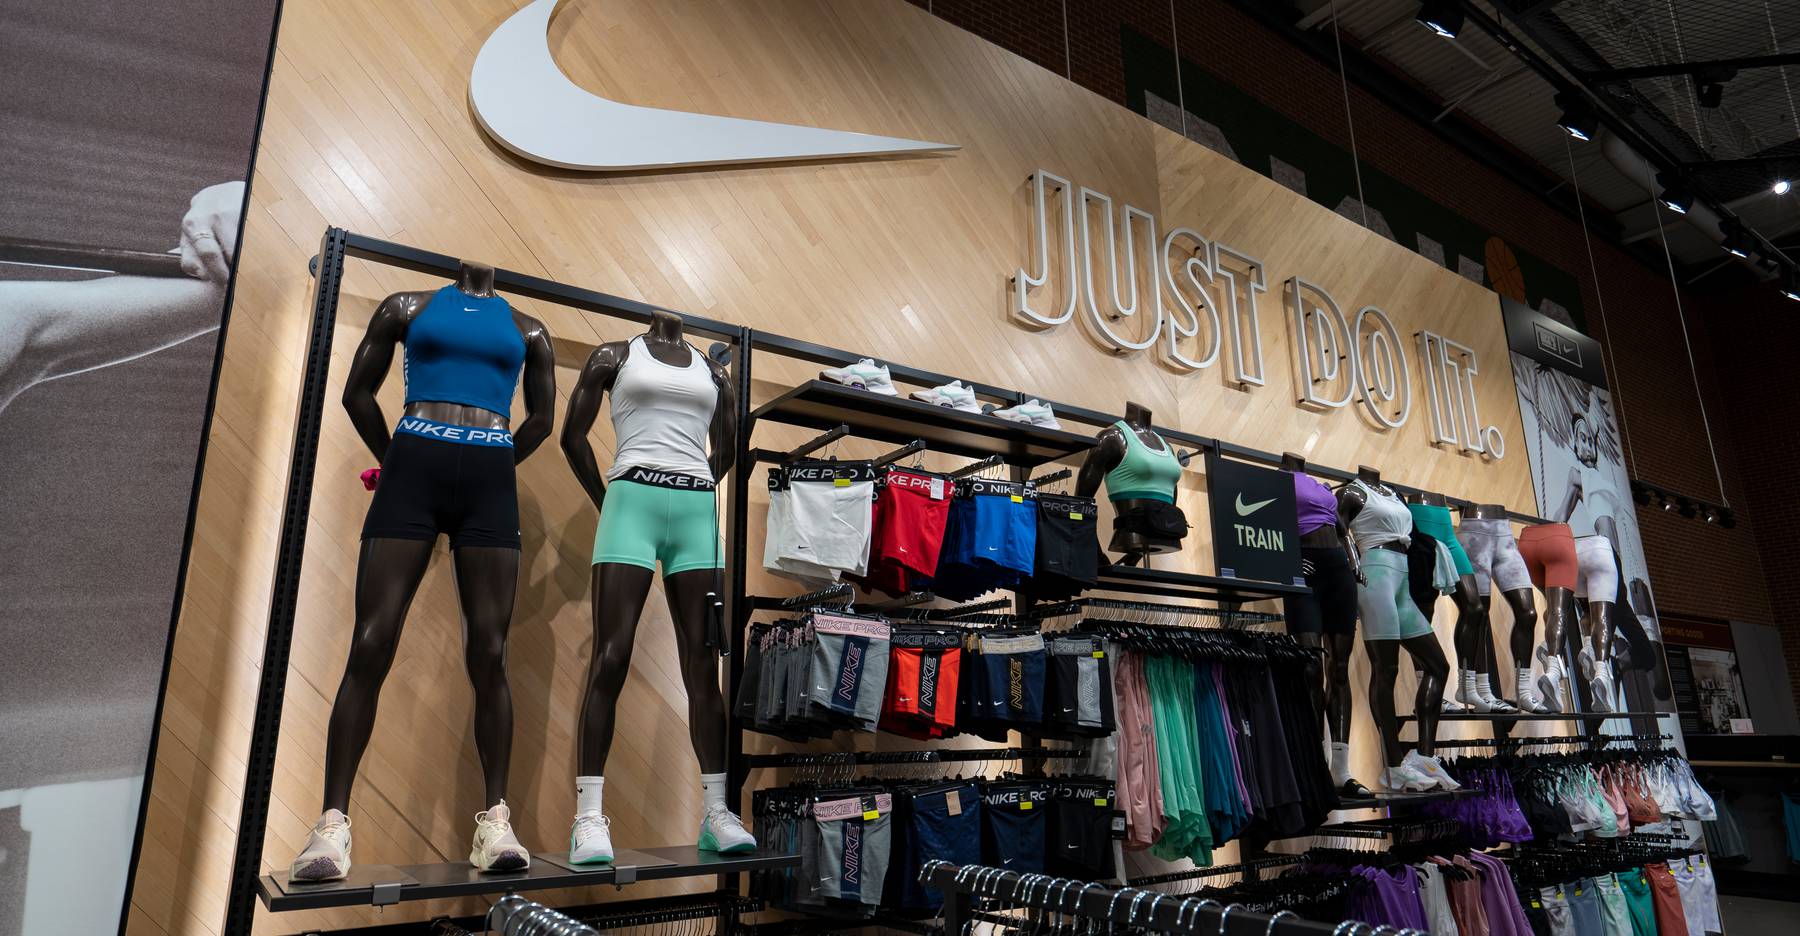 Nike products on display at a Dick's Sporting Goods store in Oregon. Shutterstock